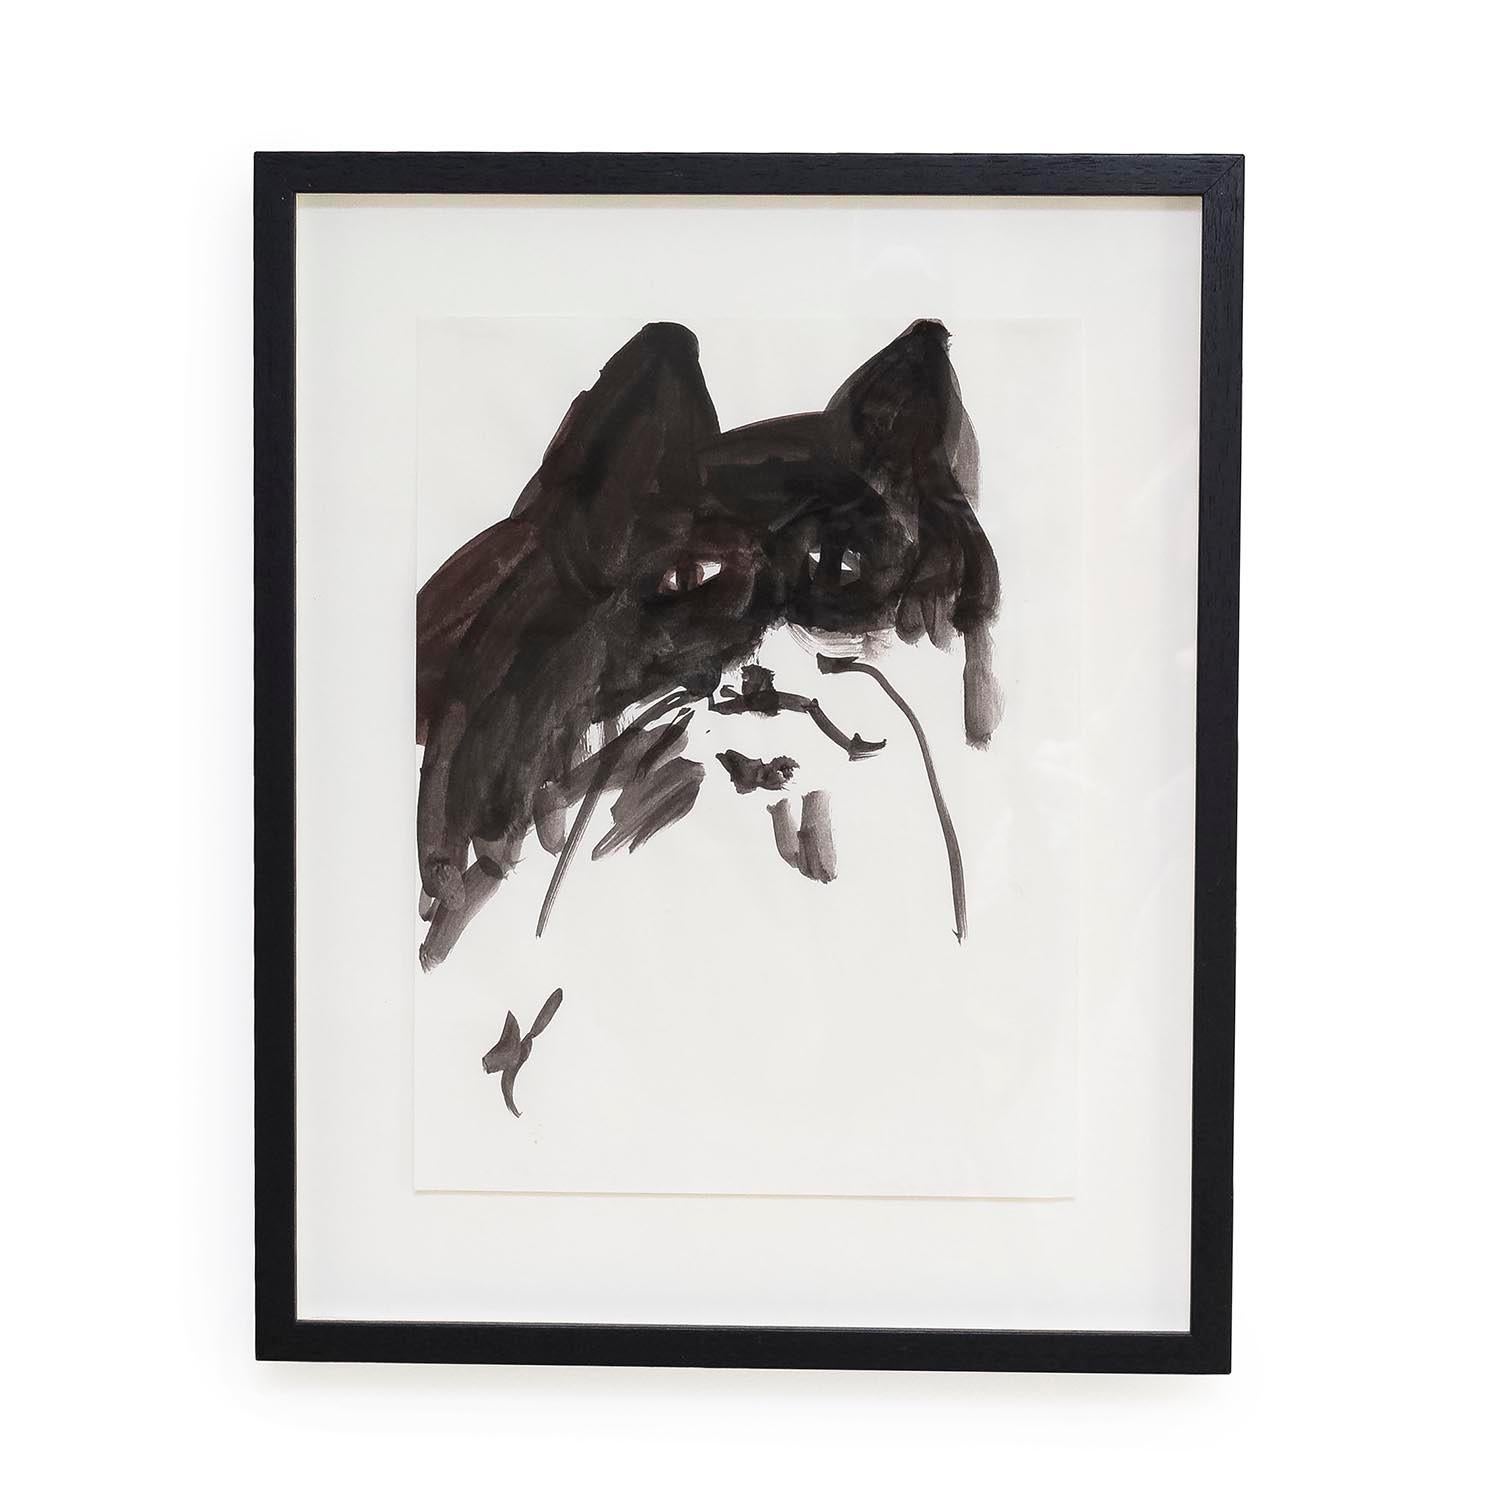 Mary Weatherford
Black and White Cat Painting I (INV# NP4051)
ink on paper
paper 11.75 x 9"
frame: 16.25 x 13.25"
date unknown 
